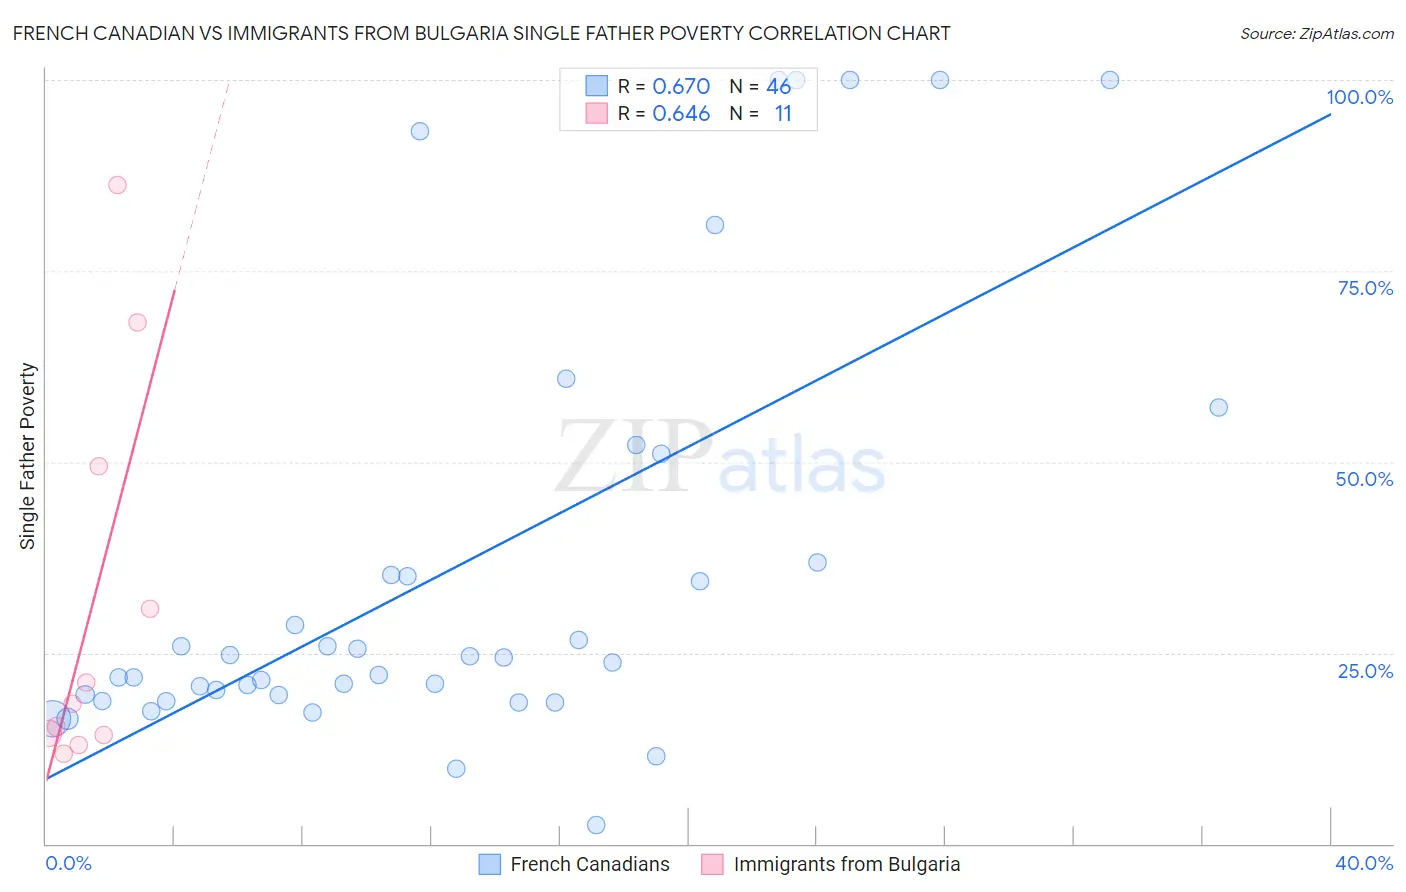 French Canadian vs Immigrants from Bulgaria Single Father Poverty